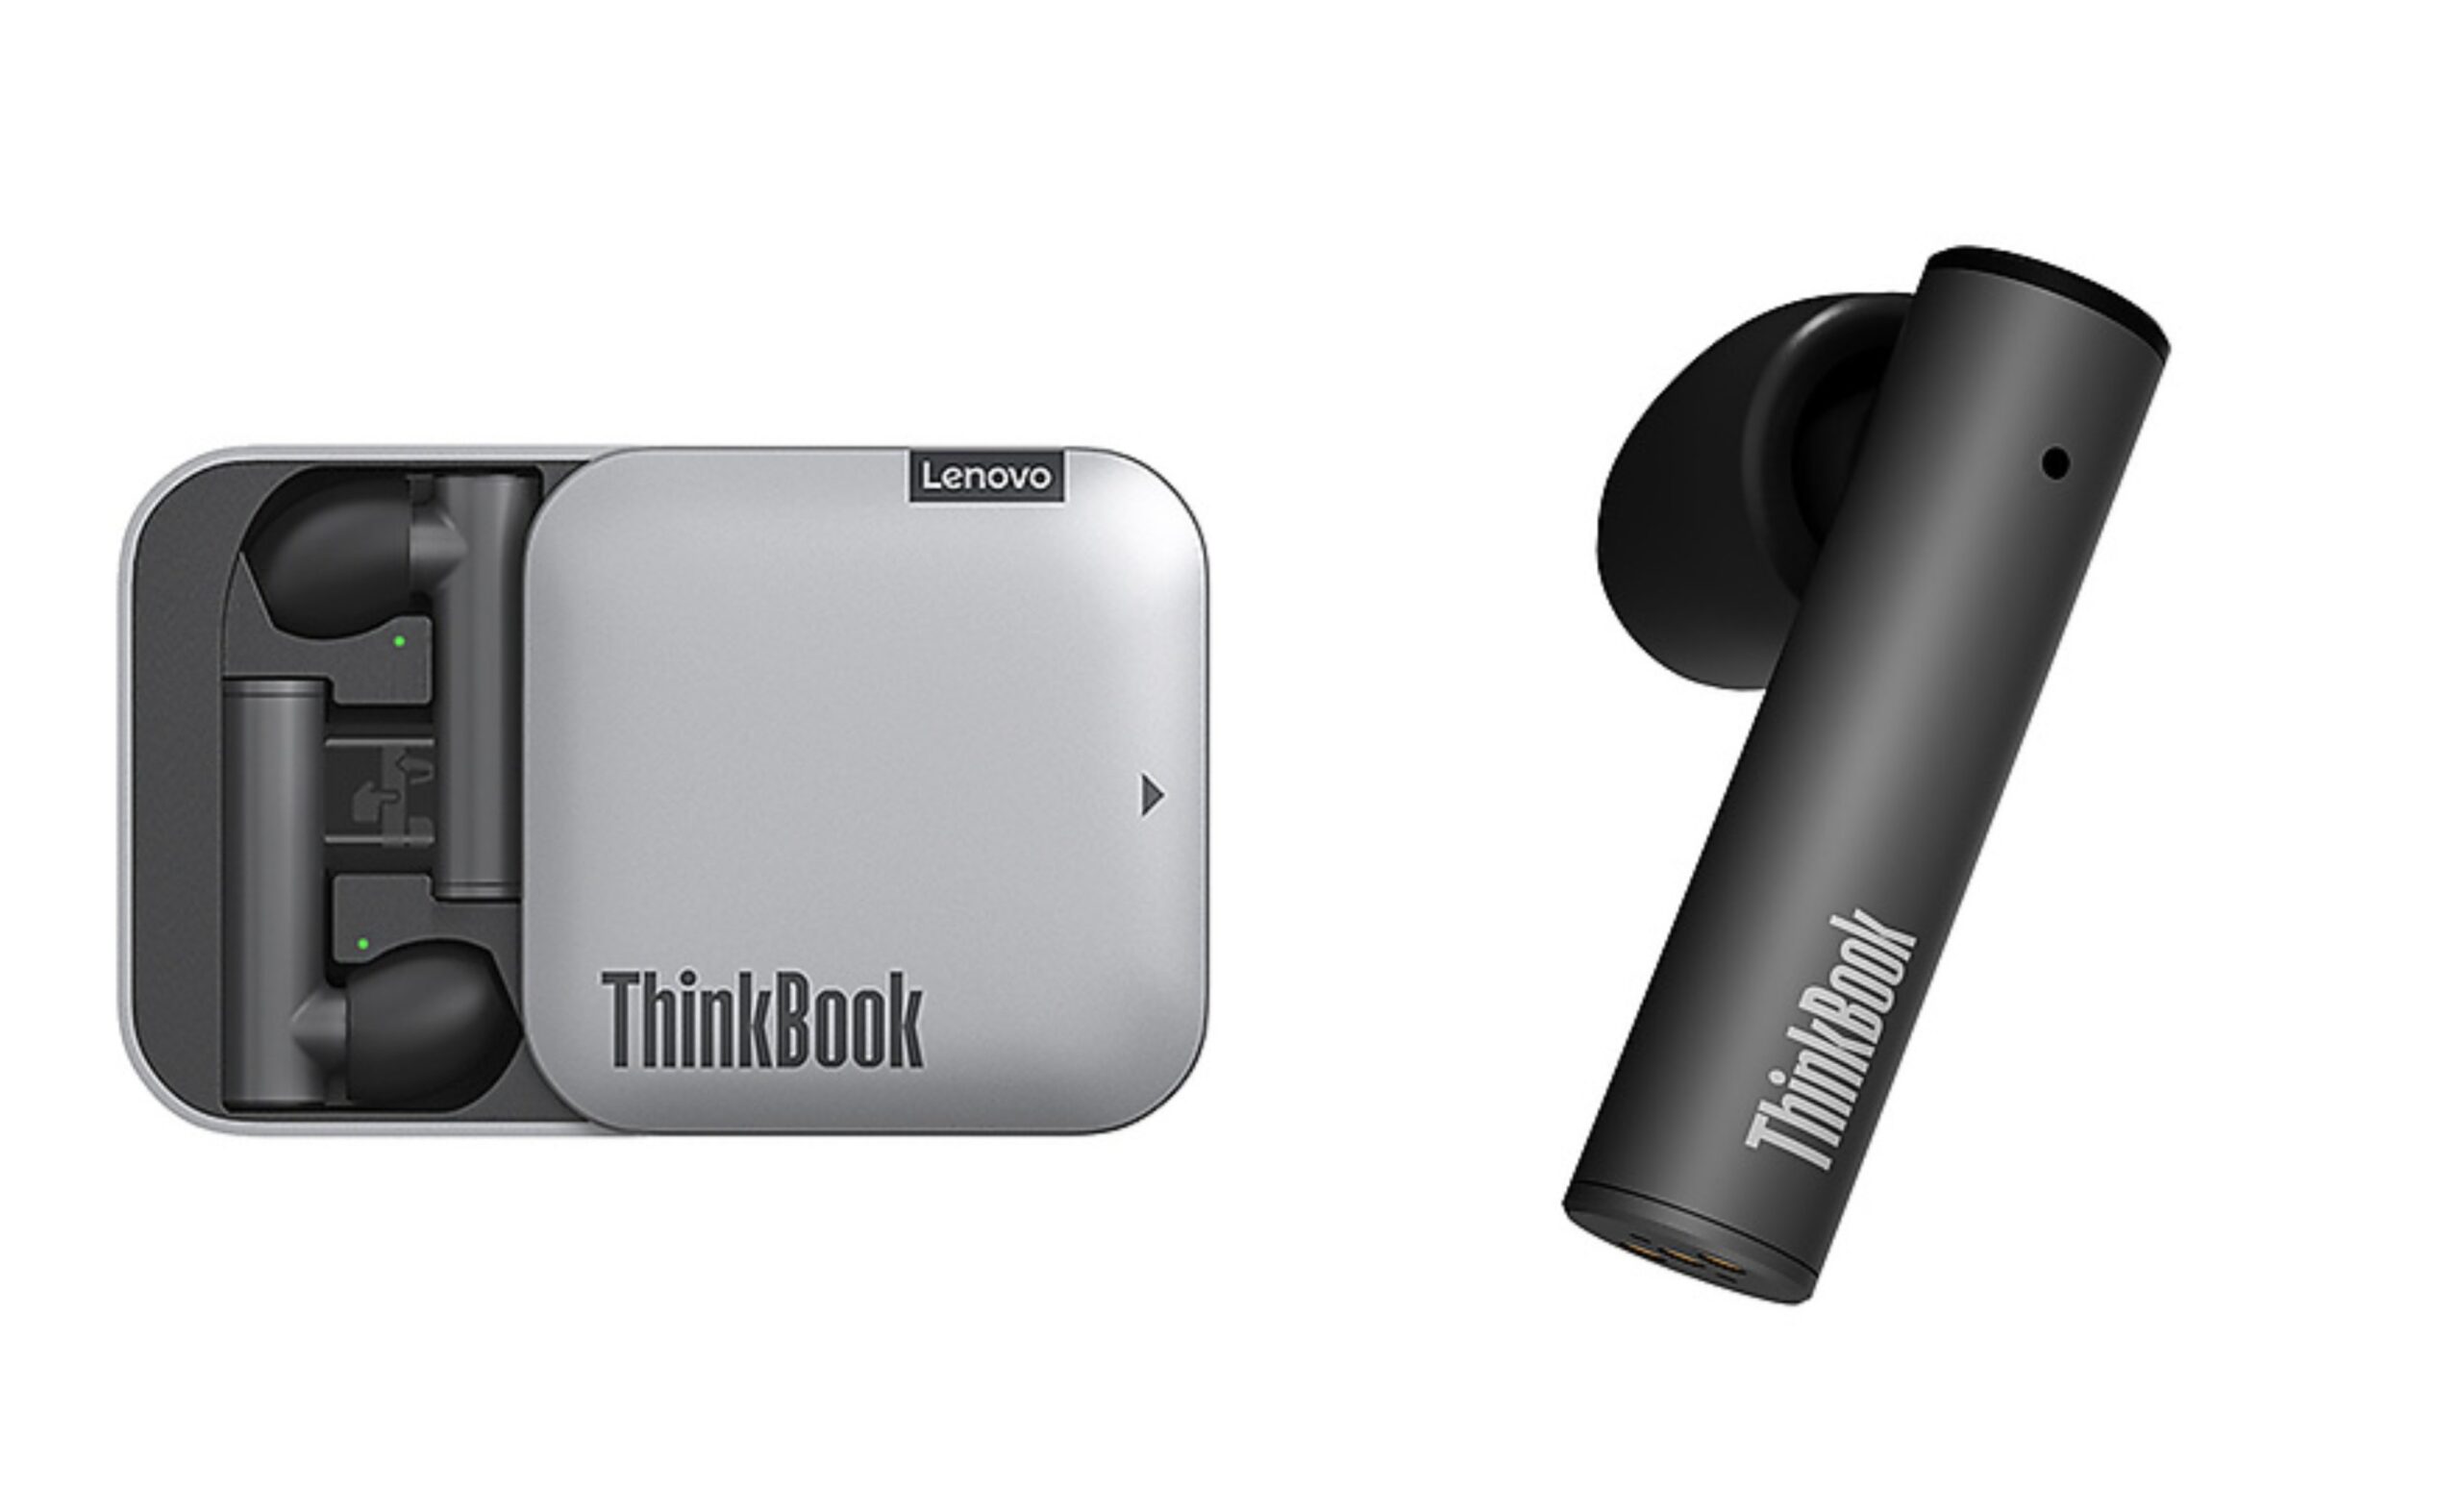 Lenovo ThinkBook Pods Pro launched in China with optimizations for Microsoft Skype and Teams